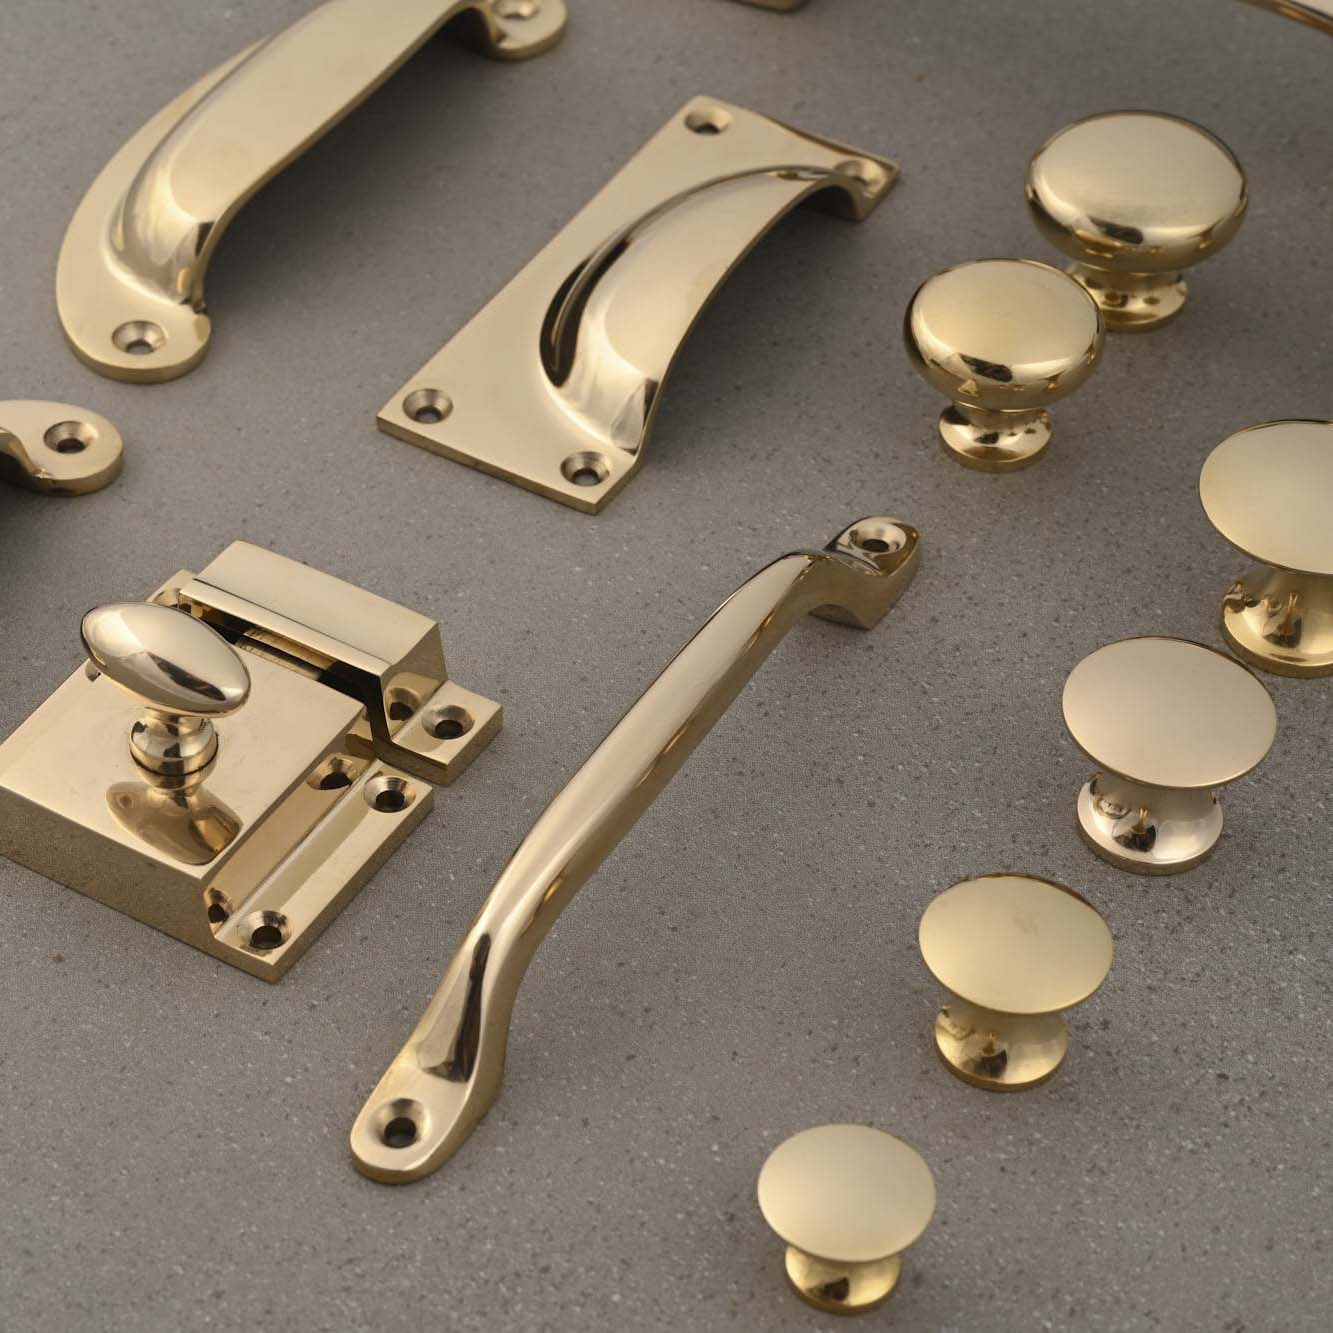 How to CLEAN Furniture HANDLES VERY EASY (Brass, Metal, Bronze